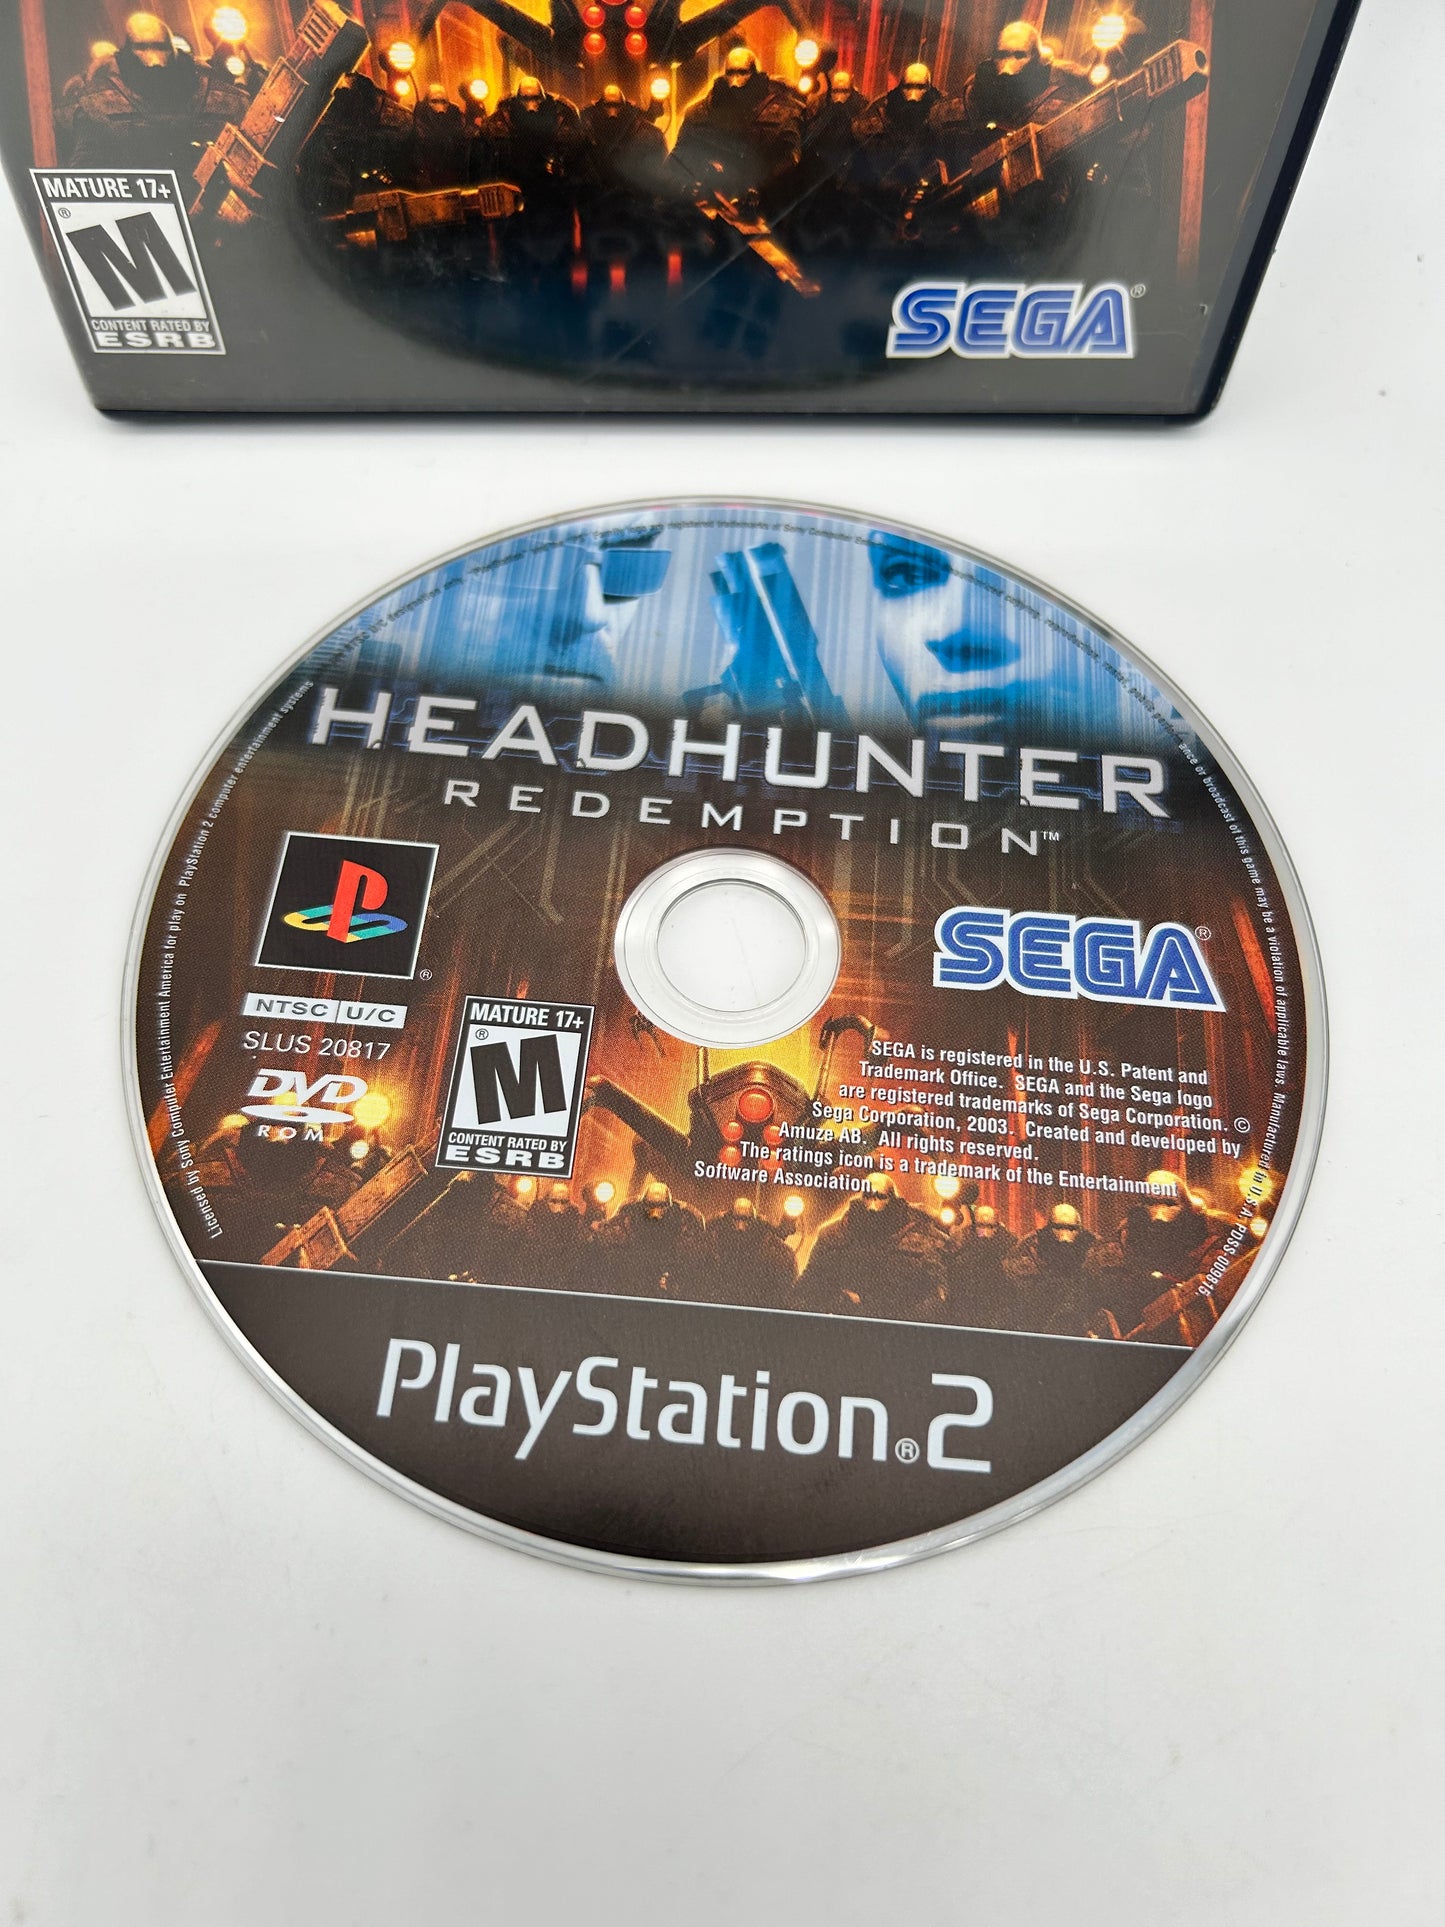 SONY PLAYSTATiON 2 [PS2] | HEADHUNTER REDEMPTION